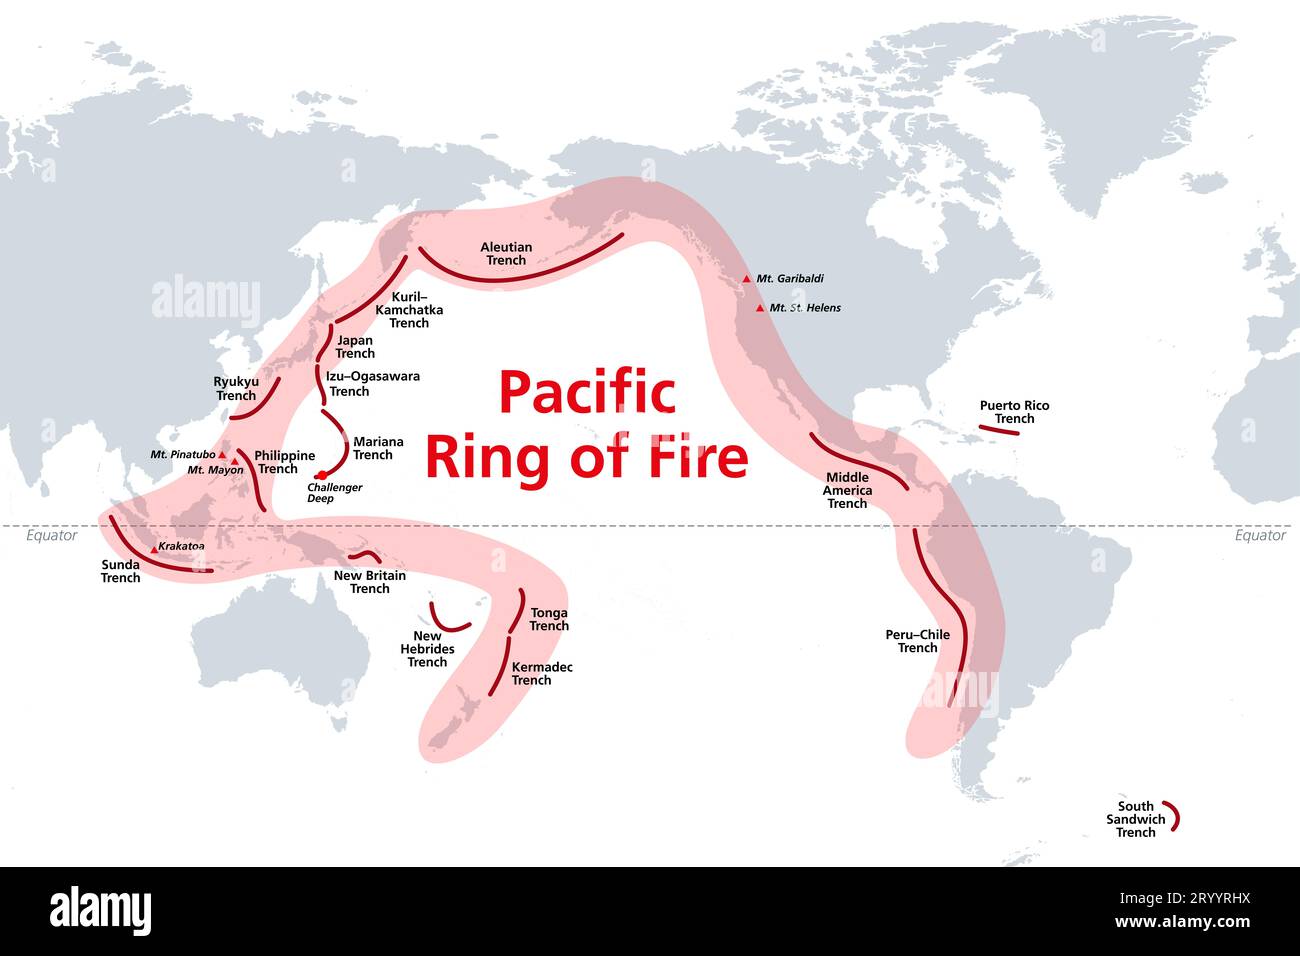 Ring of Fire - Animated Map of World Earthquakes (Jan 1 - Mar 12, 2011 GMT)  on Vimeo